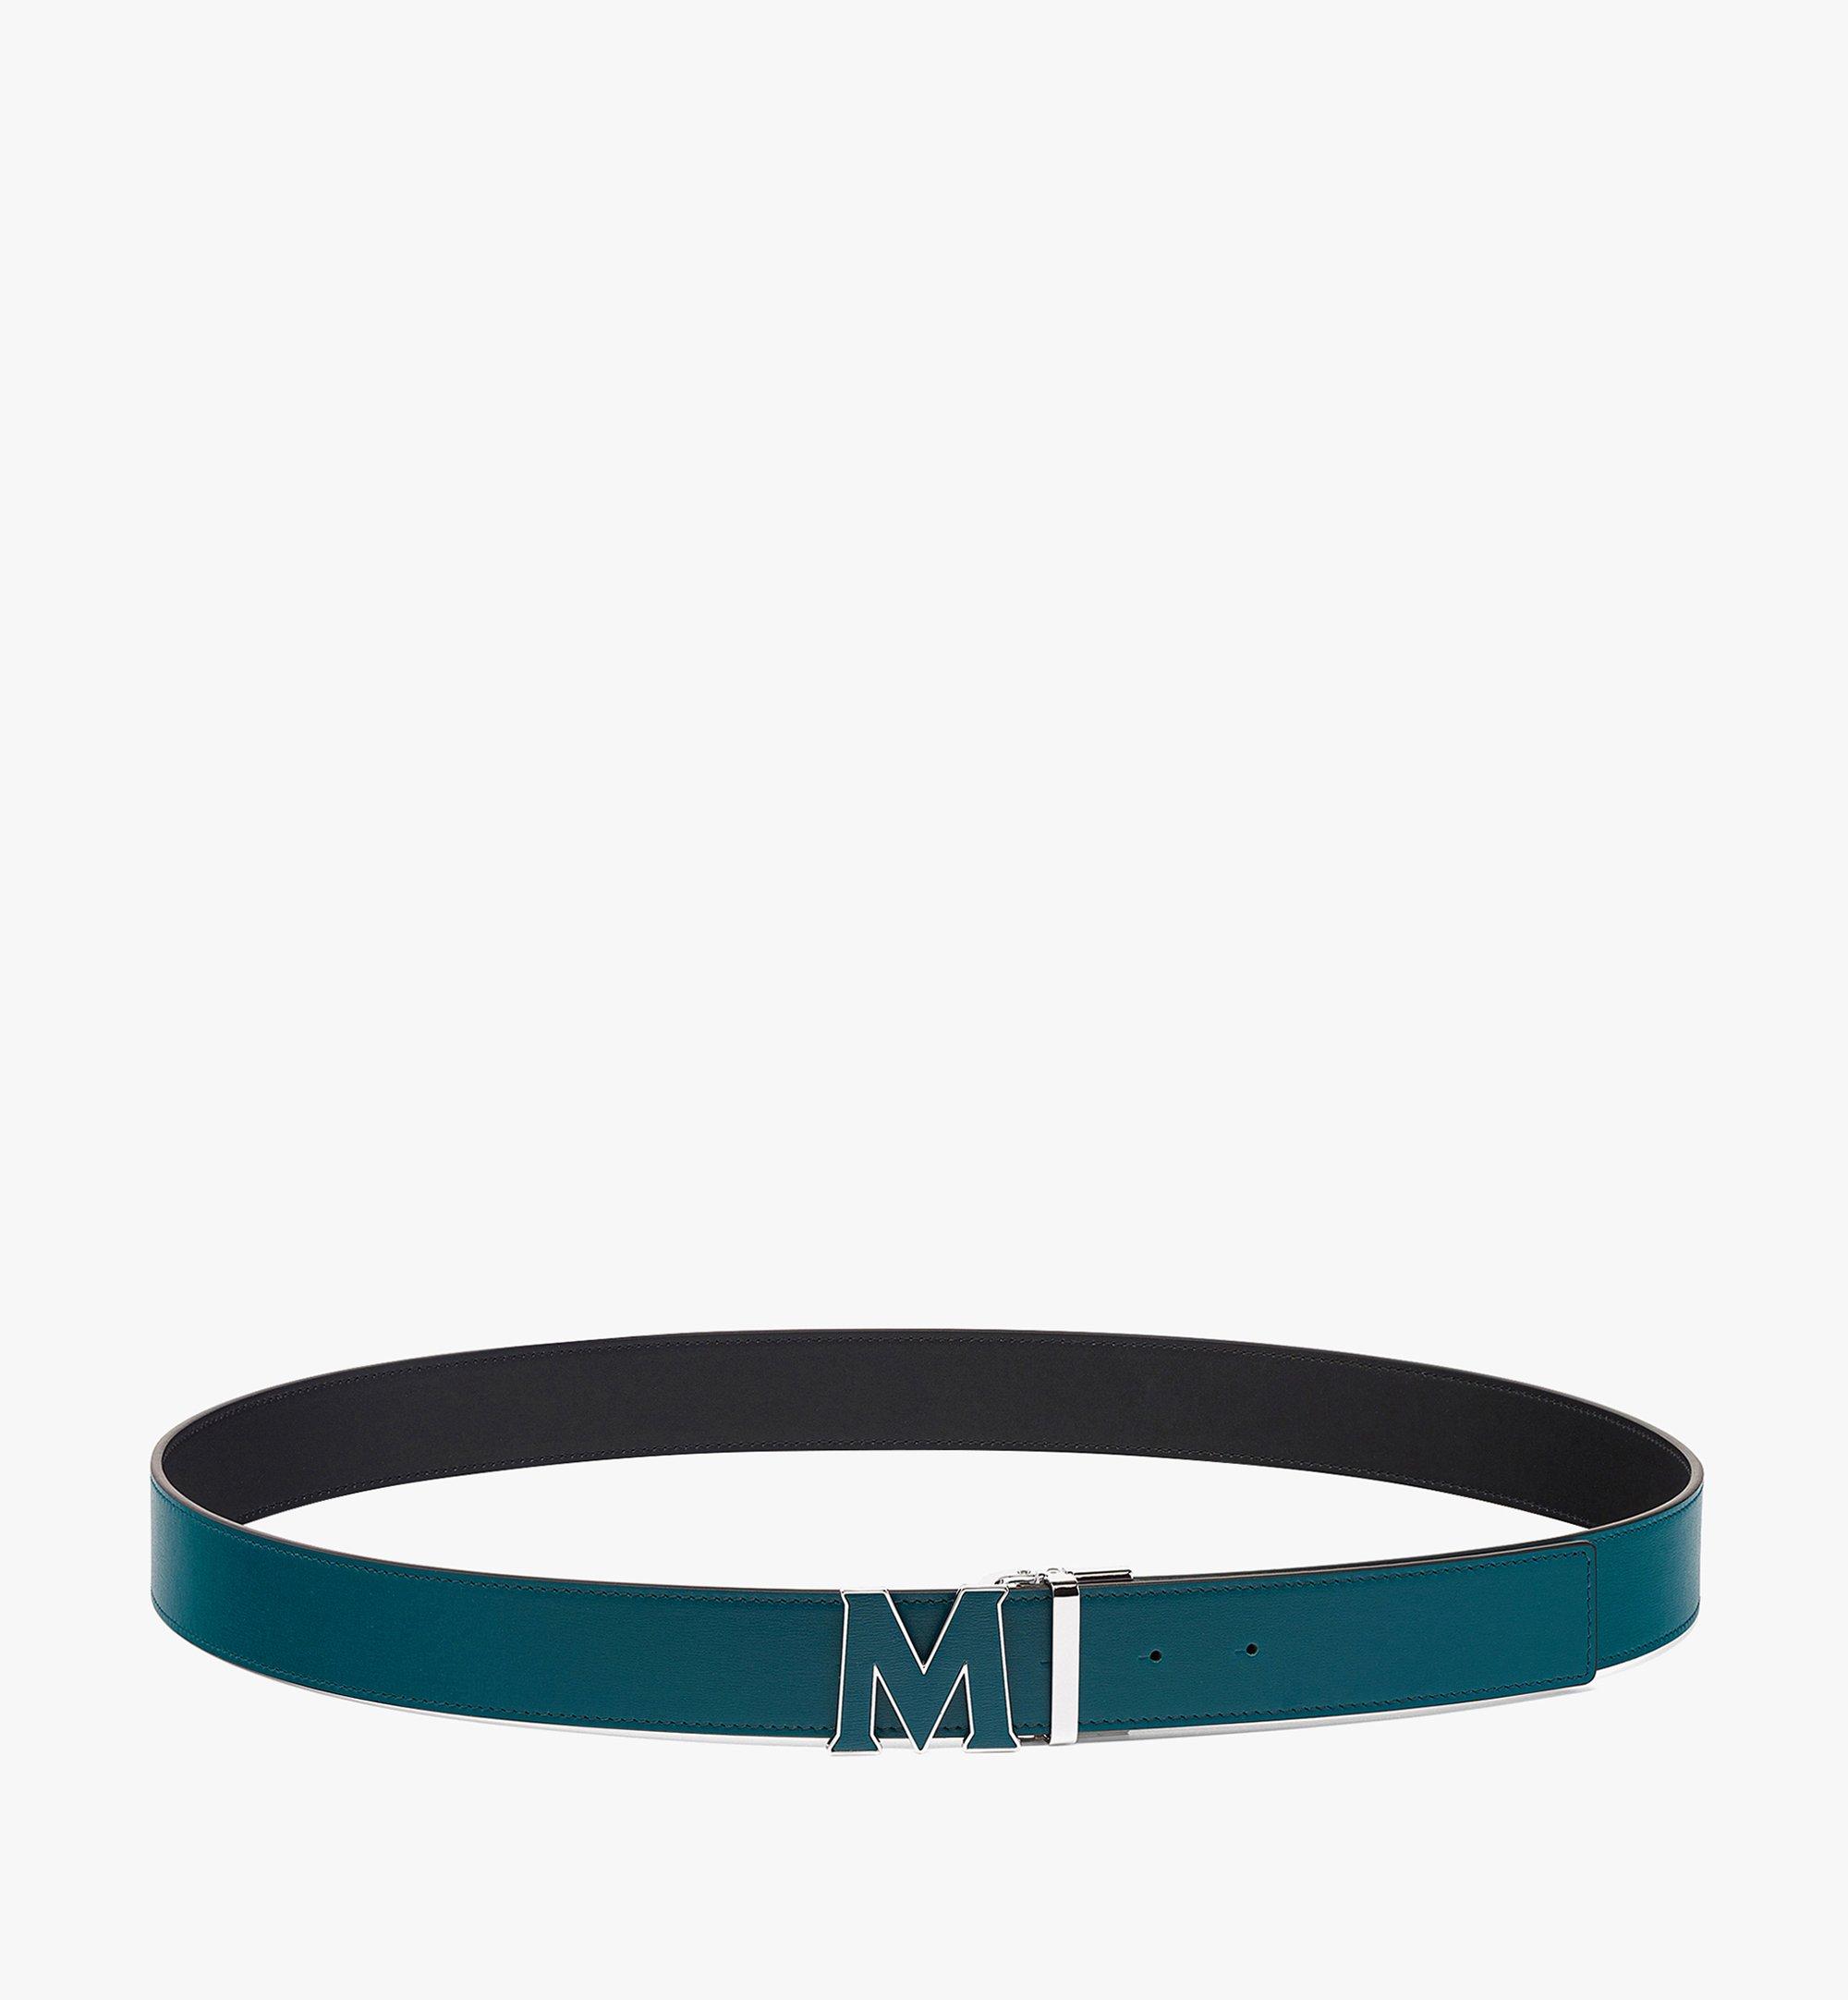 MCM Claus Leather Inlay M Reversible Belt 1.5” in Embossed Leather Green MXBCSVI06JY001 Alternate View 2